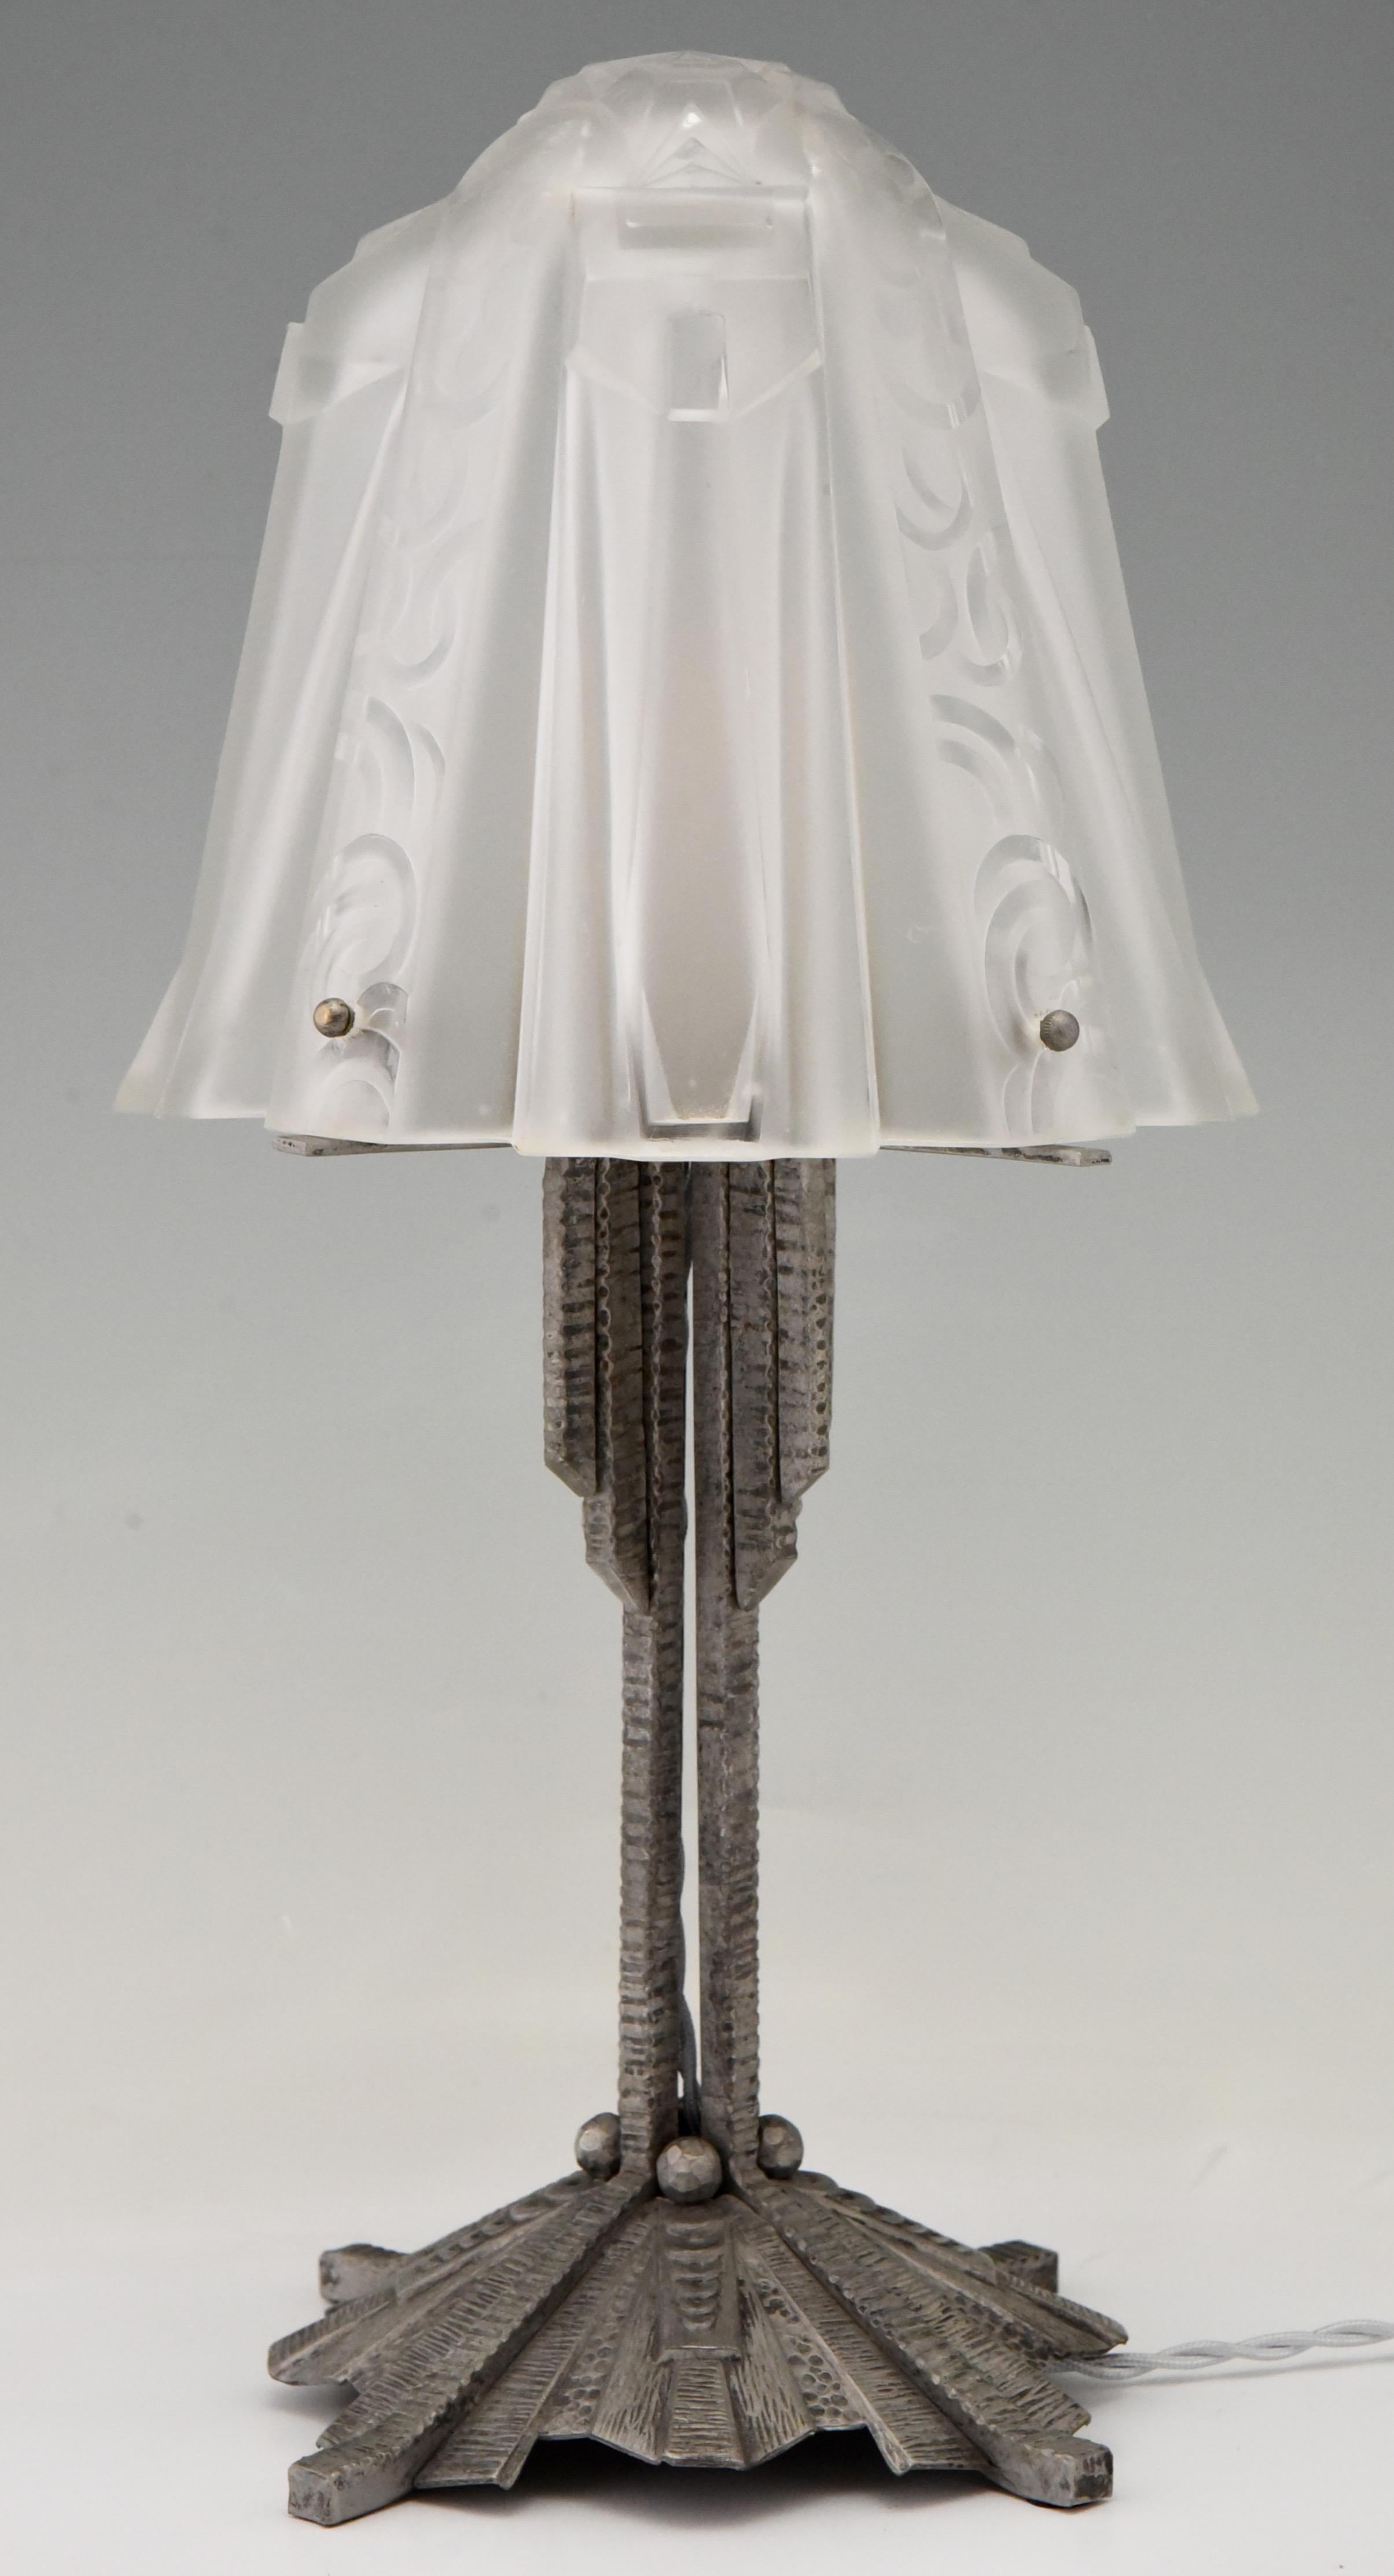 Fine Art Deco glass and iron table lamp by Muller Frères Lunéville. 
Glass shade with geometrical forms in relief on a fine wrought iron base with silver patina. France 1925. 
Literature:
“Glass, Art Nouveau to Art Deco” by Victor Arwas, Academy.